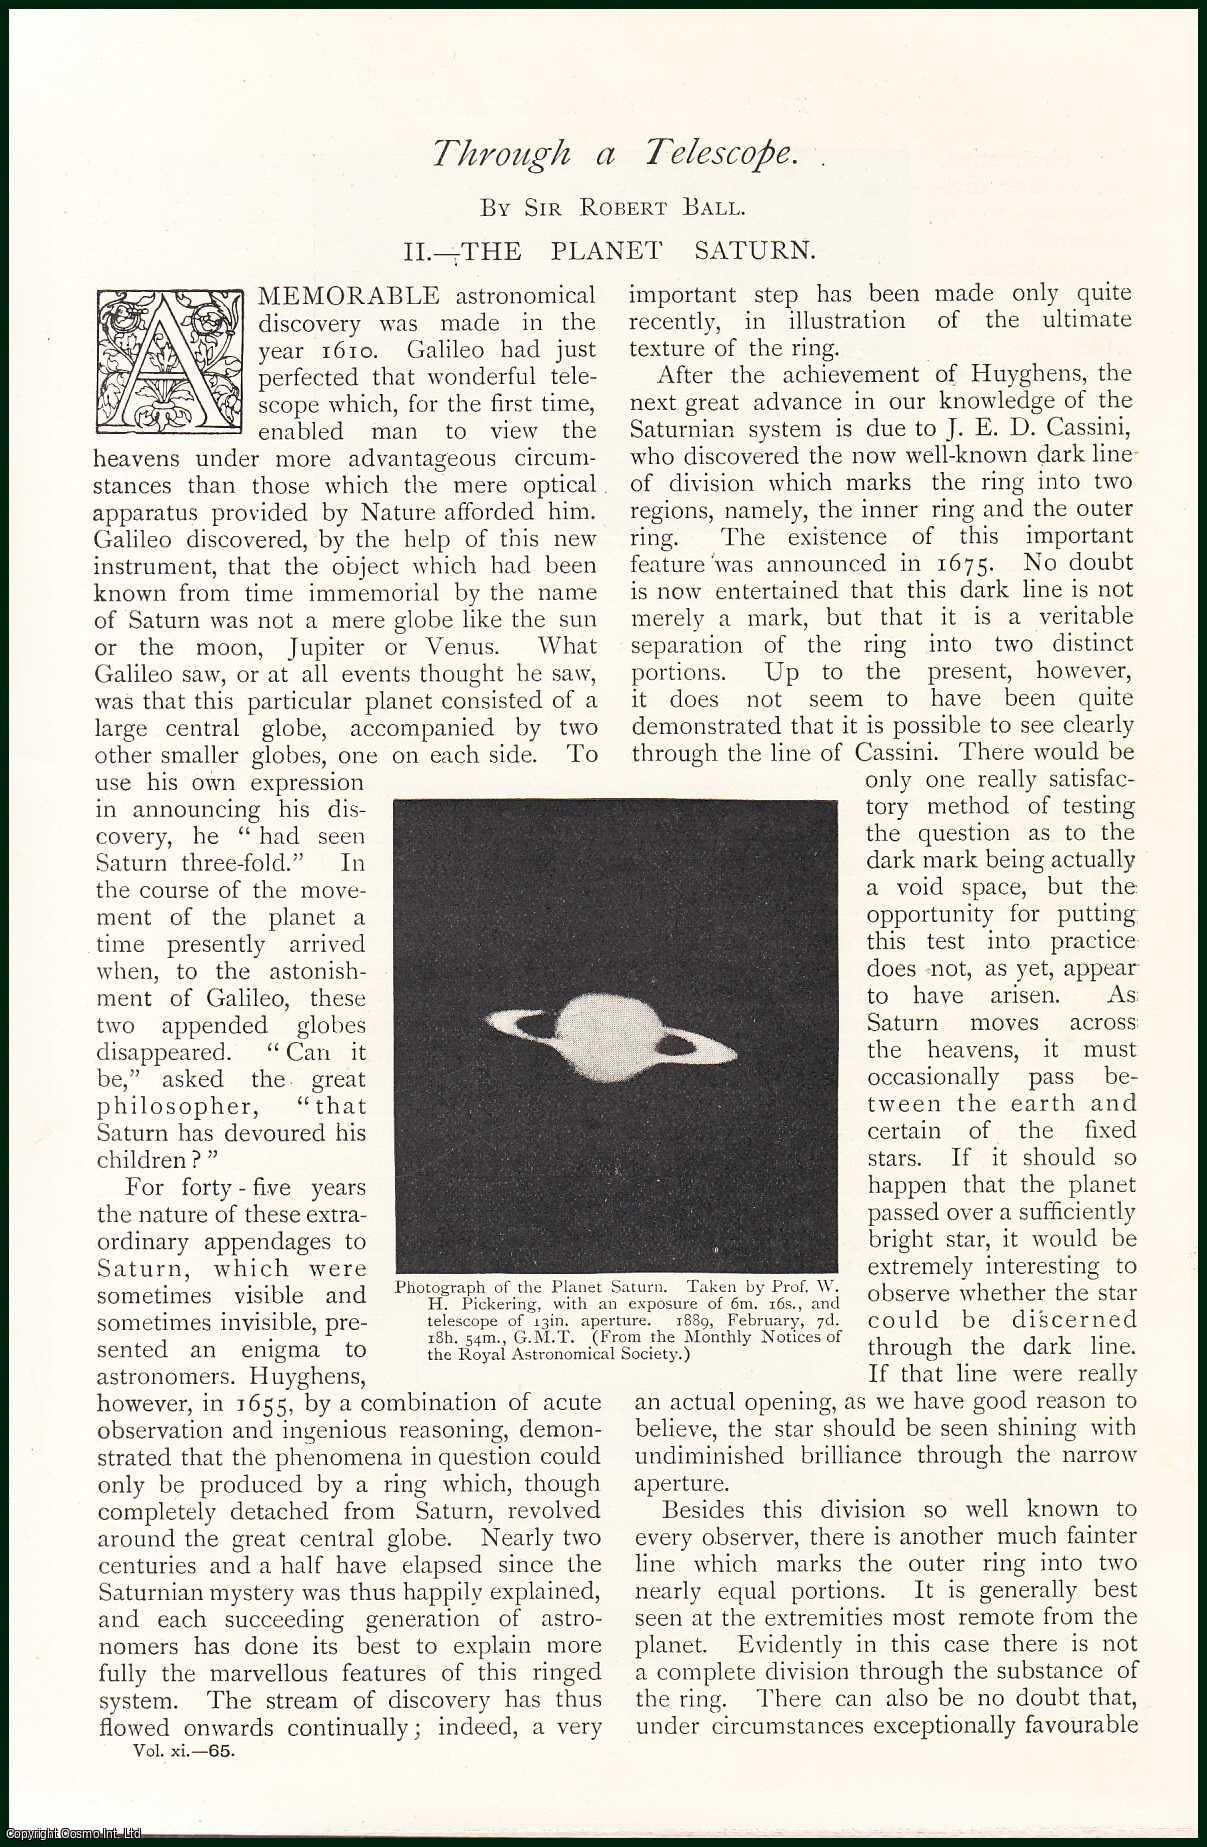 Robert Ball - The Planet Saturn. Through A Telescope. An uncommon original article from The Strand Magazine, 1896.